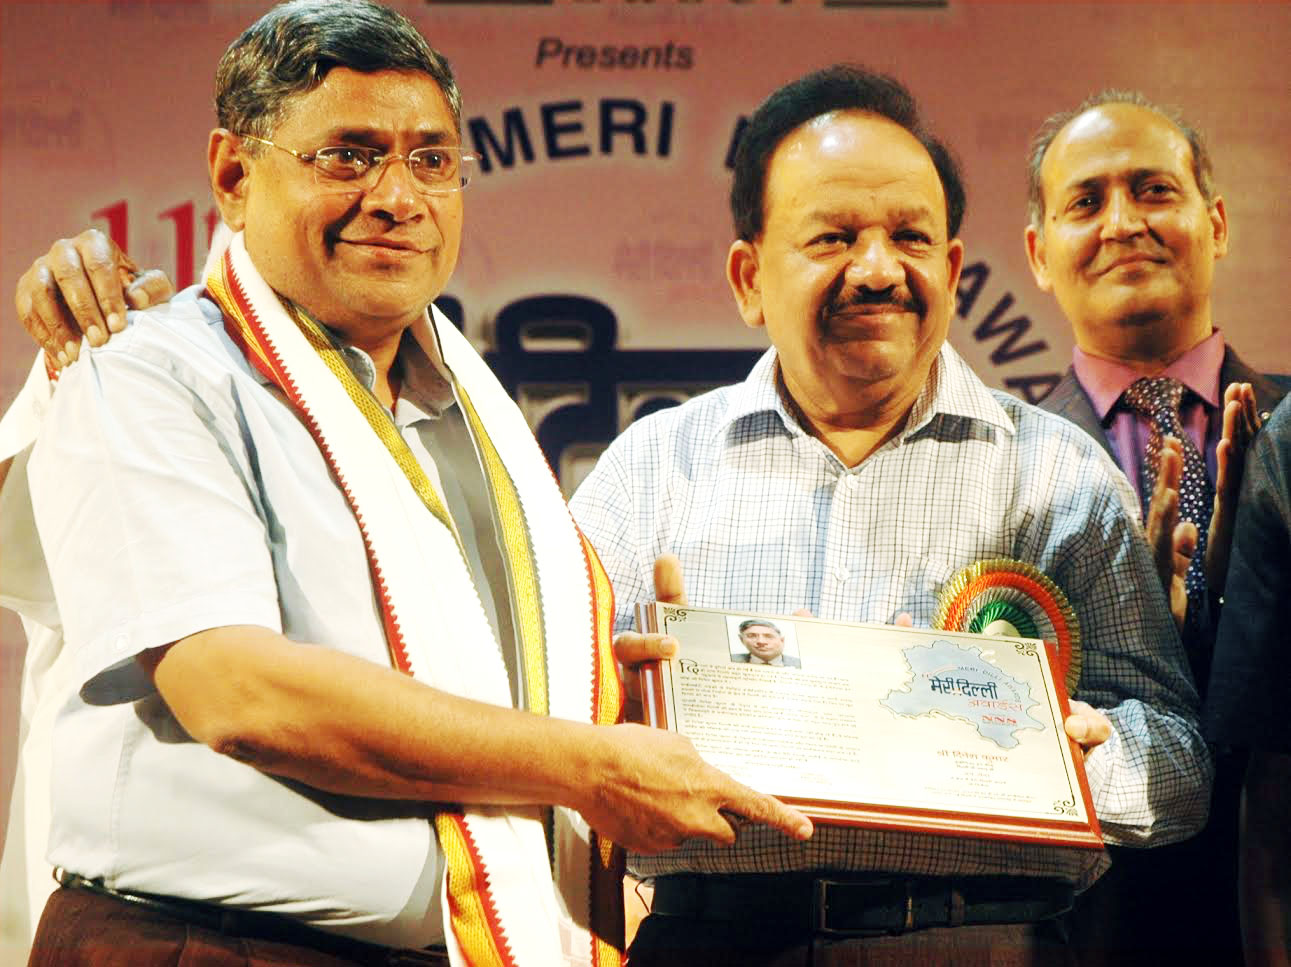 Dinesh Kumar,Engineer-in-Chief,PWD,Delhi, Awarded for Excellent work in PWD